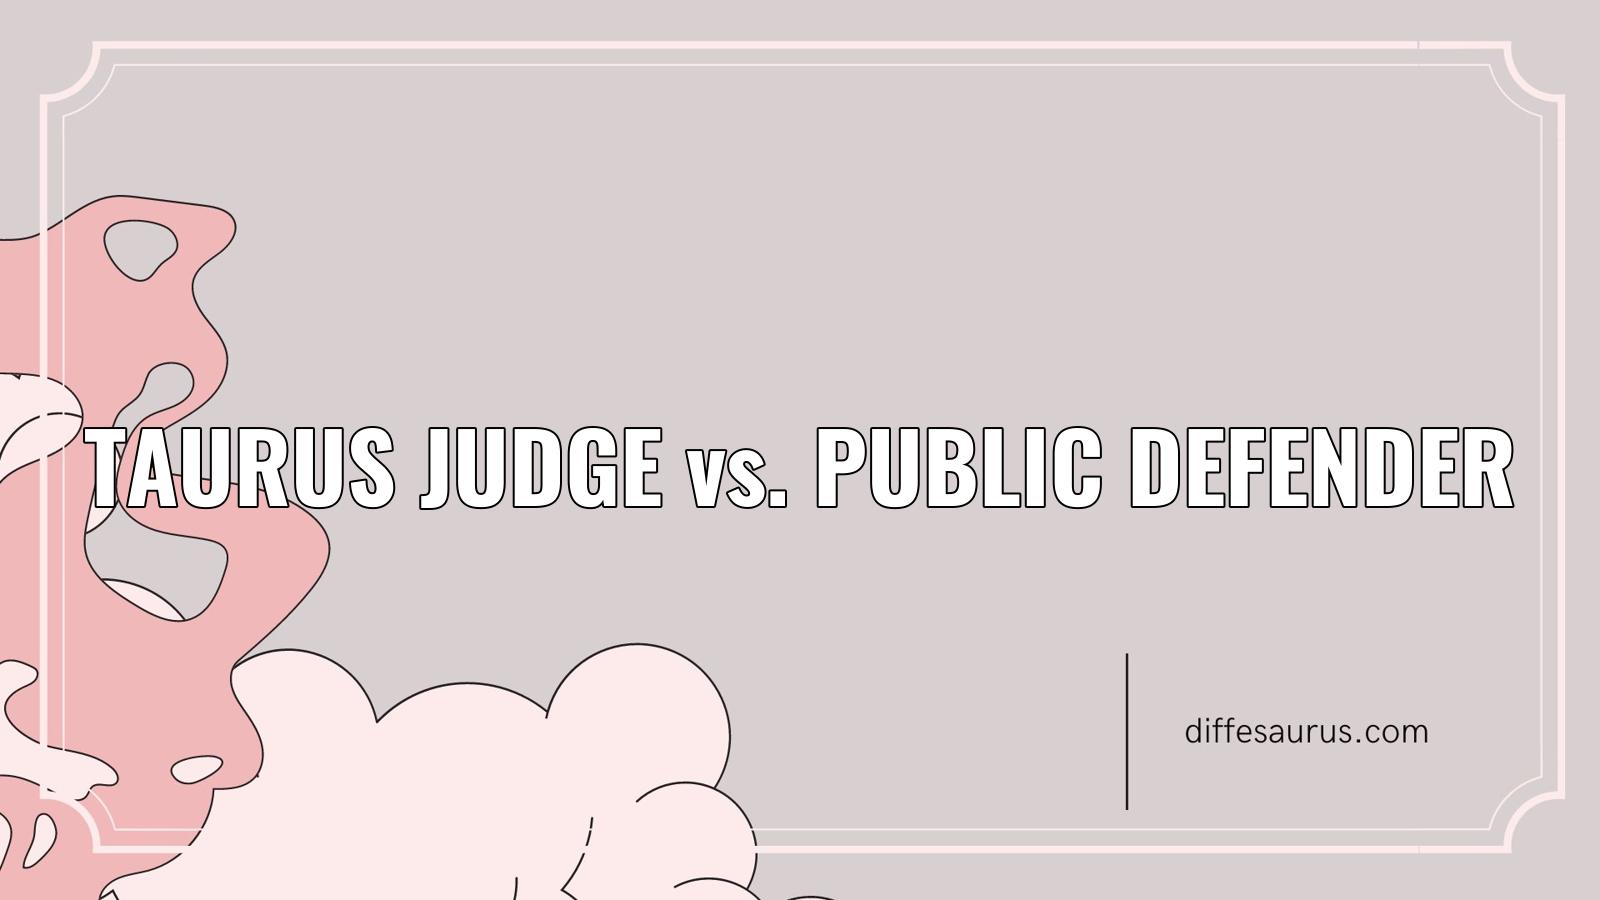 You are currently viewing How are Taurus Judge and Public Defender Different?